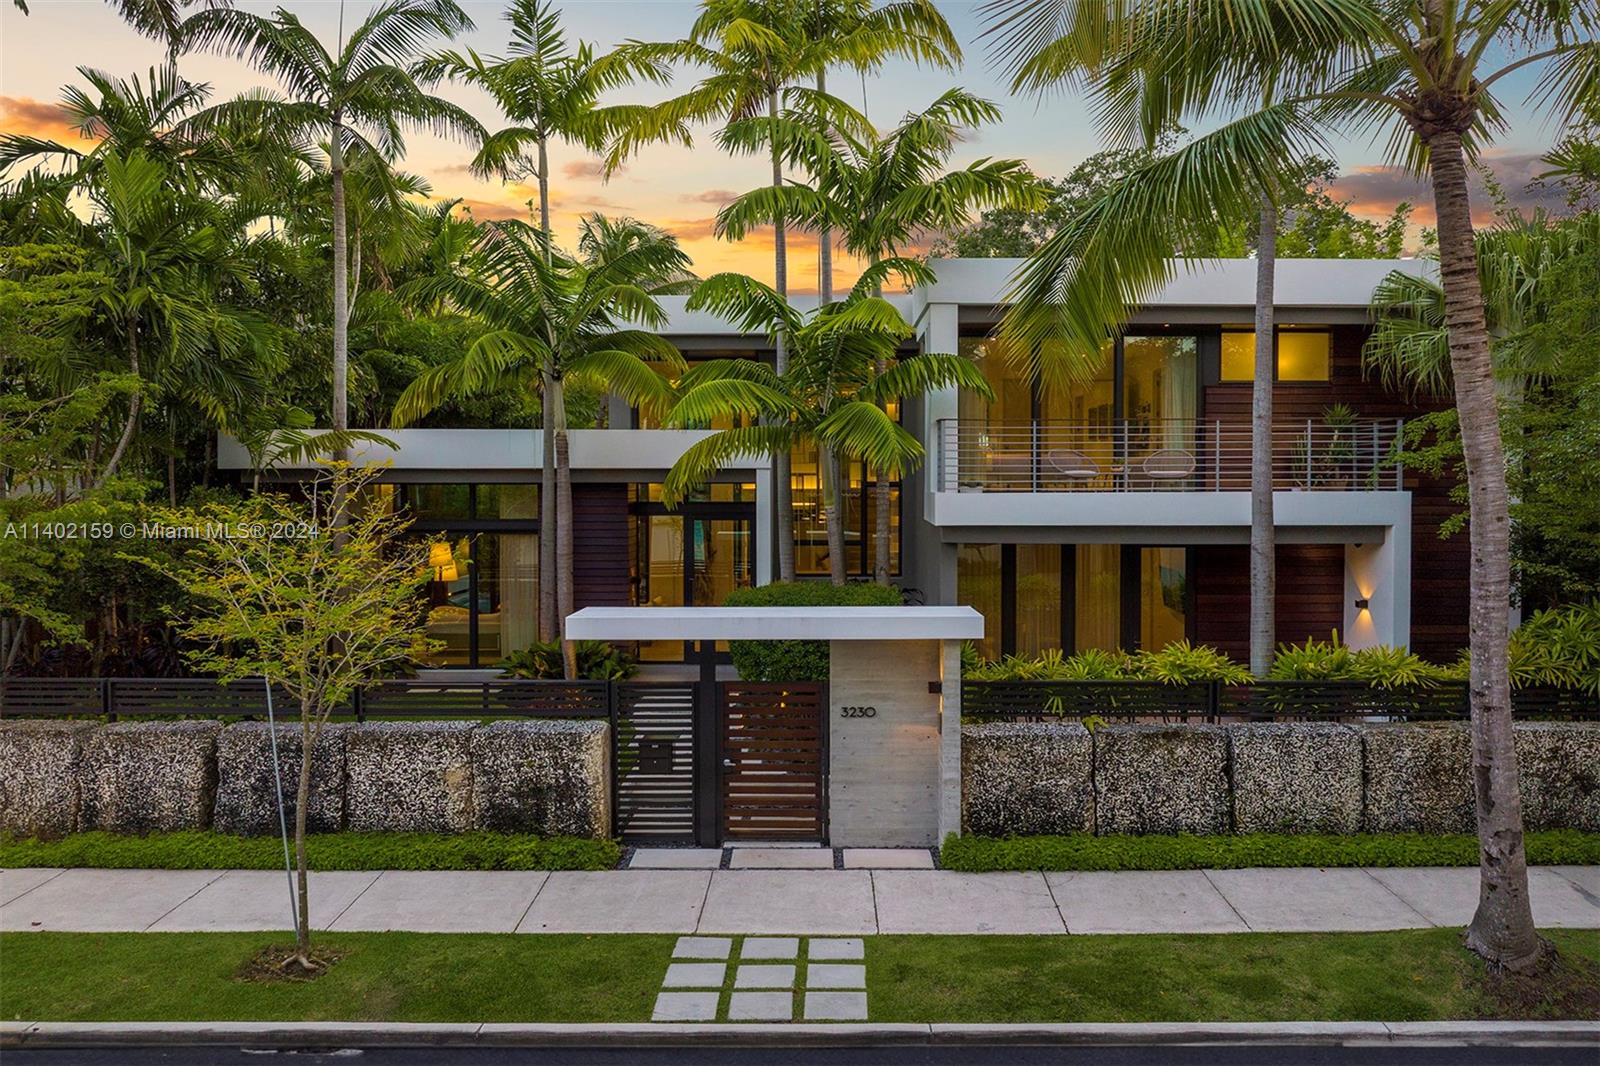 Indulge in the ultimate Coconut Grove lifestyle in this extraordinary modern estate by renowned architect Charles Treister. Perched atop a ridge 21 ft above sea level and surrounded by a lush garden, this unique Tri-Level home seamlessly blends indoor and outdoor spaces for a tranquil tropical experience. Boasting an array of meticulous details and exquisite craftsmanship, you'll be captivated by a spectacular floorplan with 7 bedrooms and 7/2 bathrooms, rare to find basement w/ A/C, separate guest suite apartment, elevator, and exquisite finishes throughout. Experience an outdoor oasis with glowing pool & spa, covered terrace, summer kitchen and outdoor shower. This modern smart home offers it all with a full house generator, 2 car garage in desirable North Grove and prestigious schools.